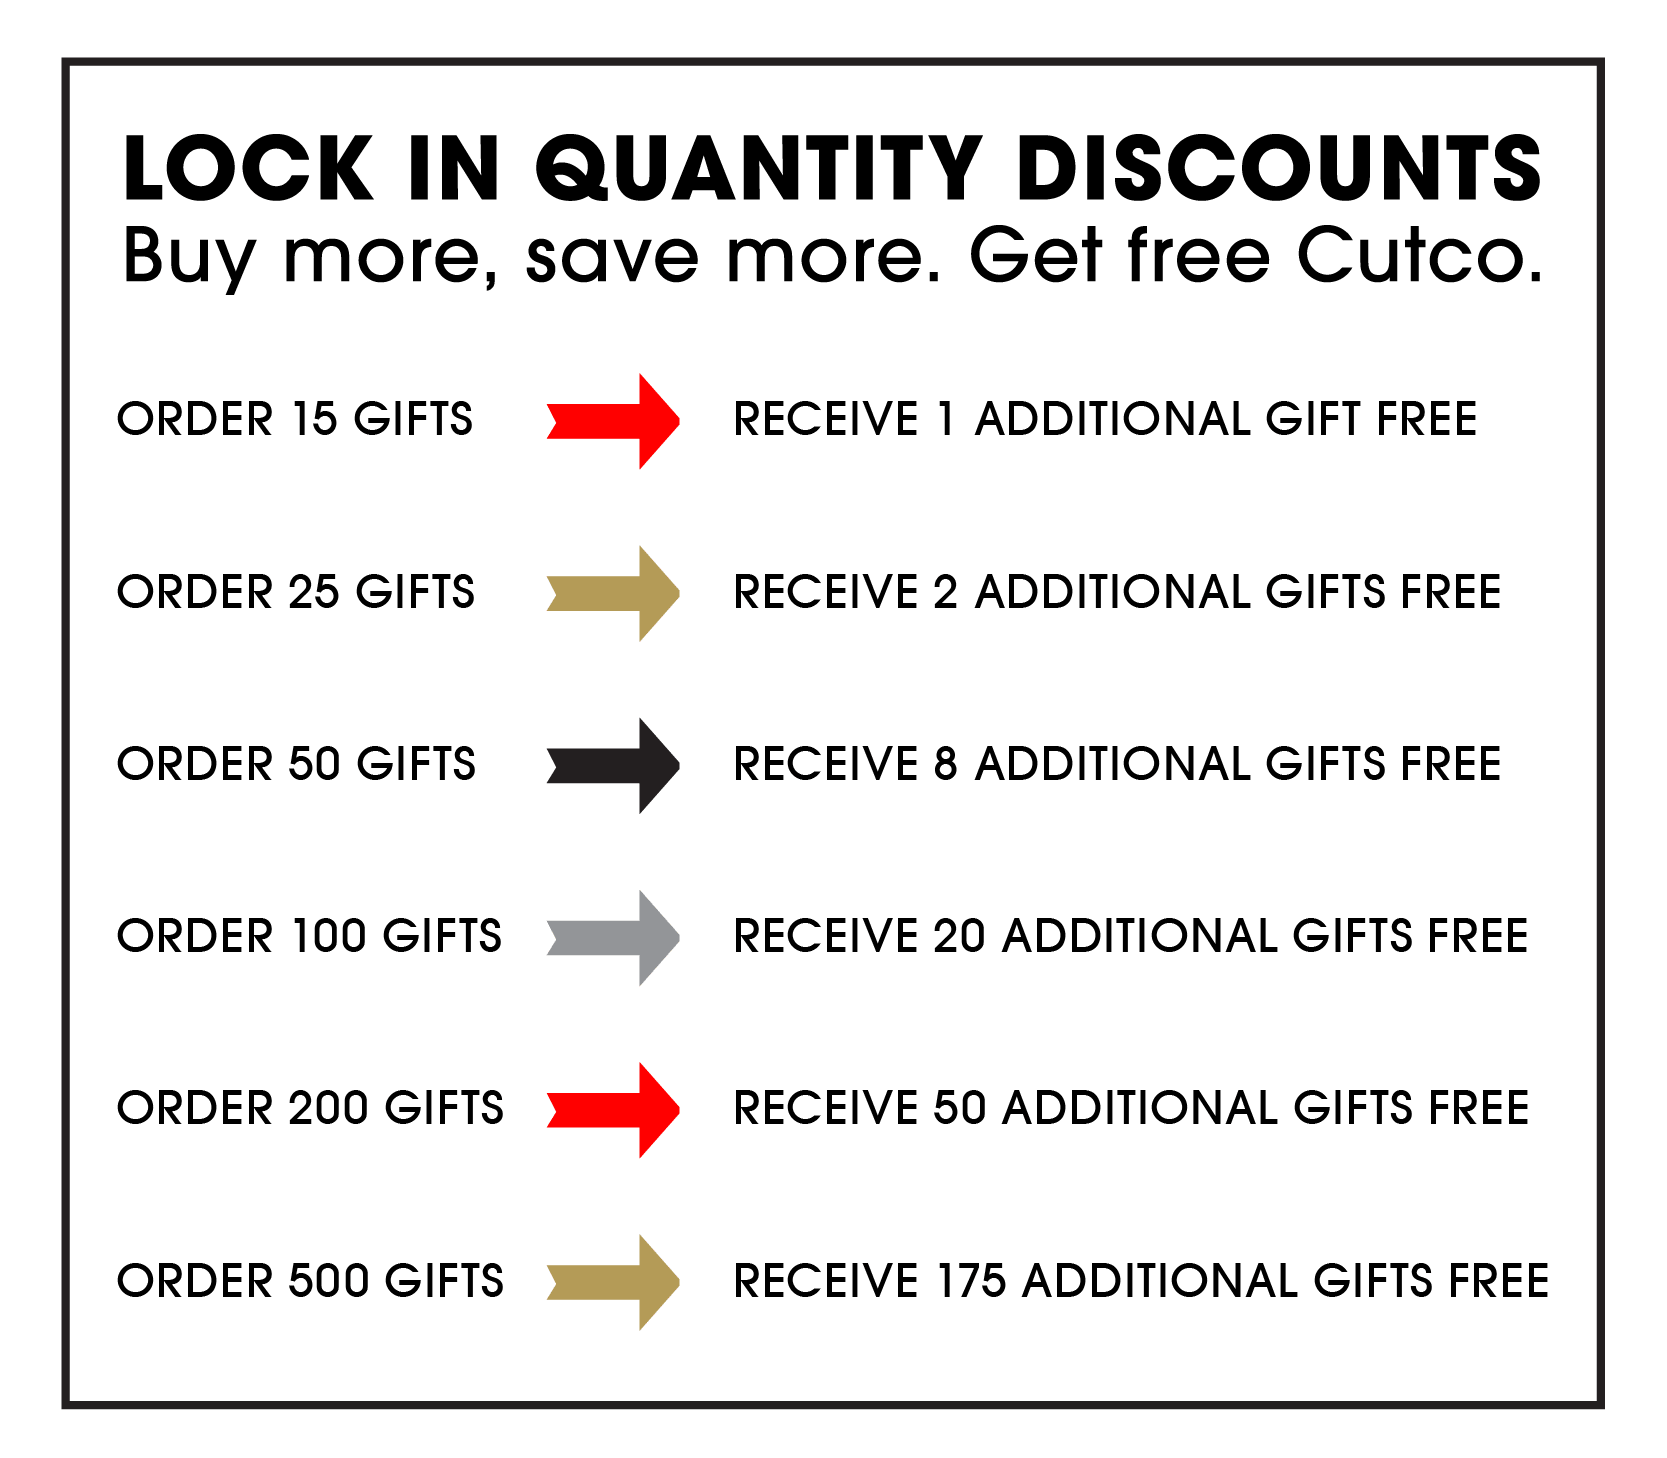 https://www.giftswithanedge.com/wp-content/uploads/2016/07/QuantityDiscounts_2.png